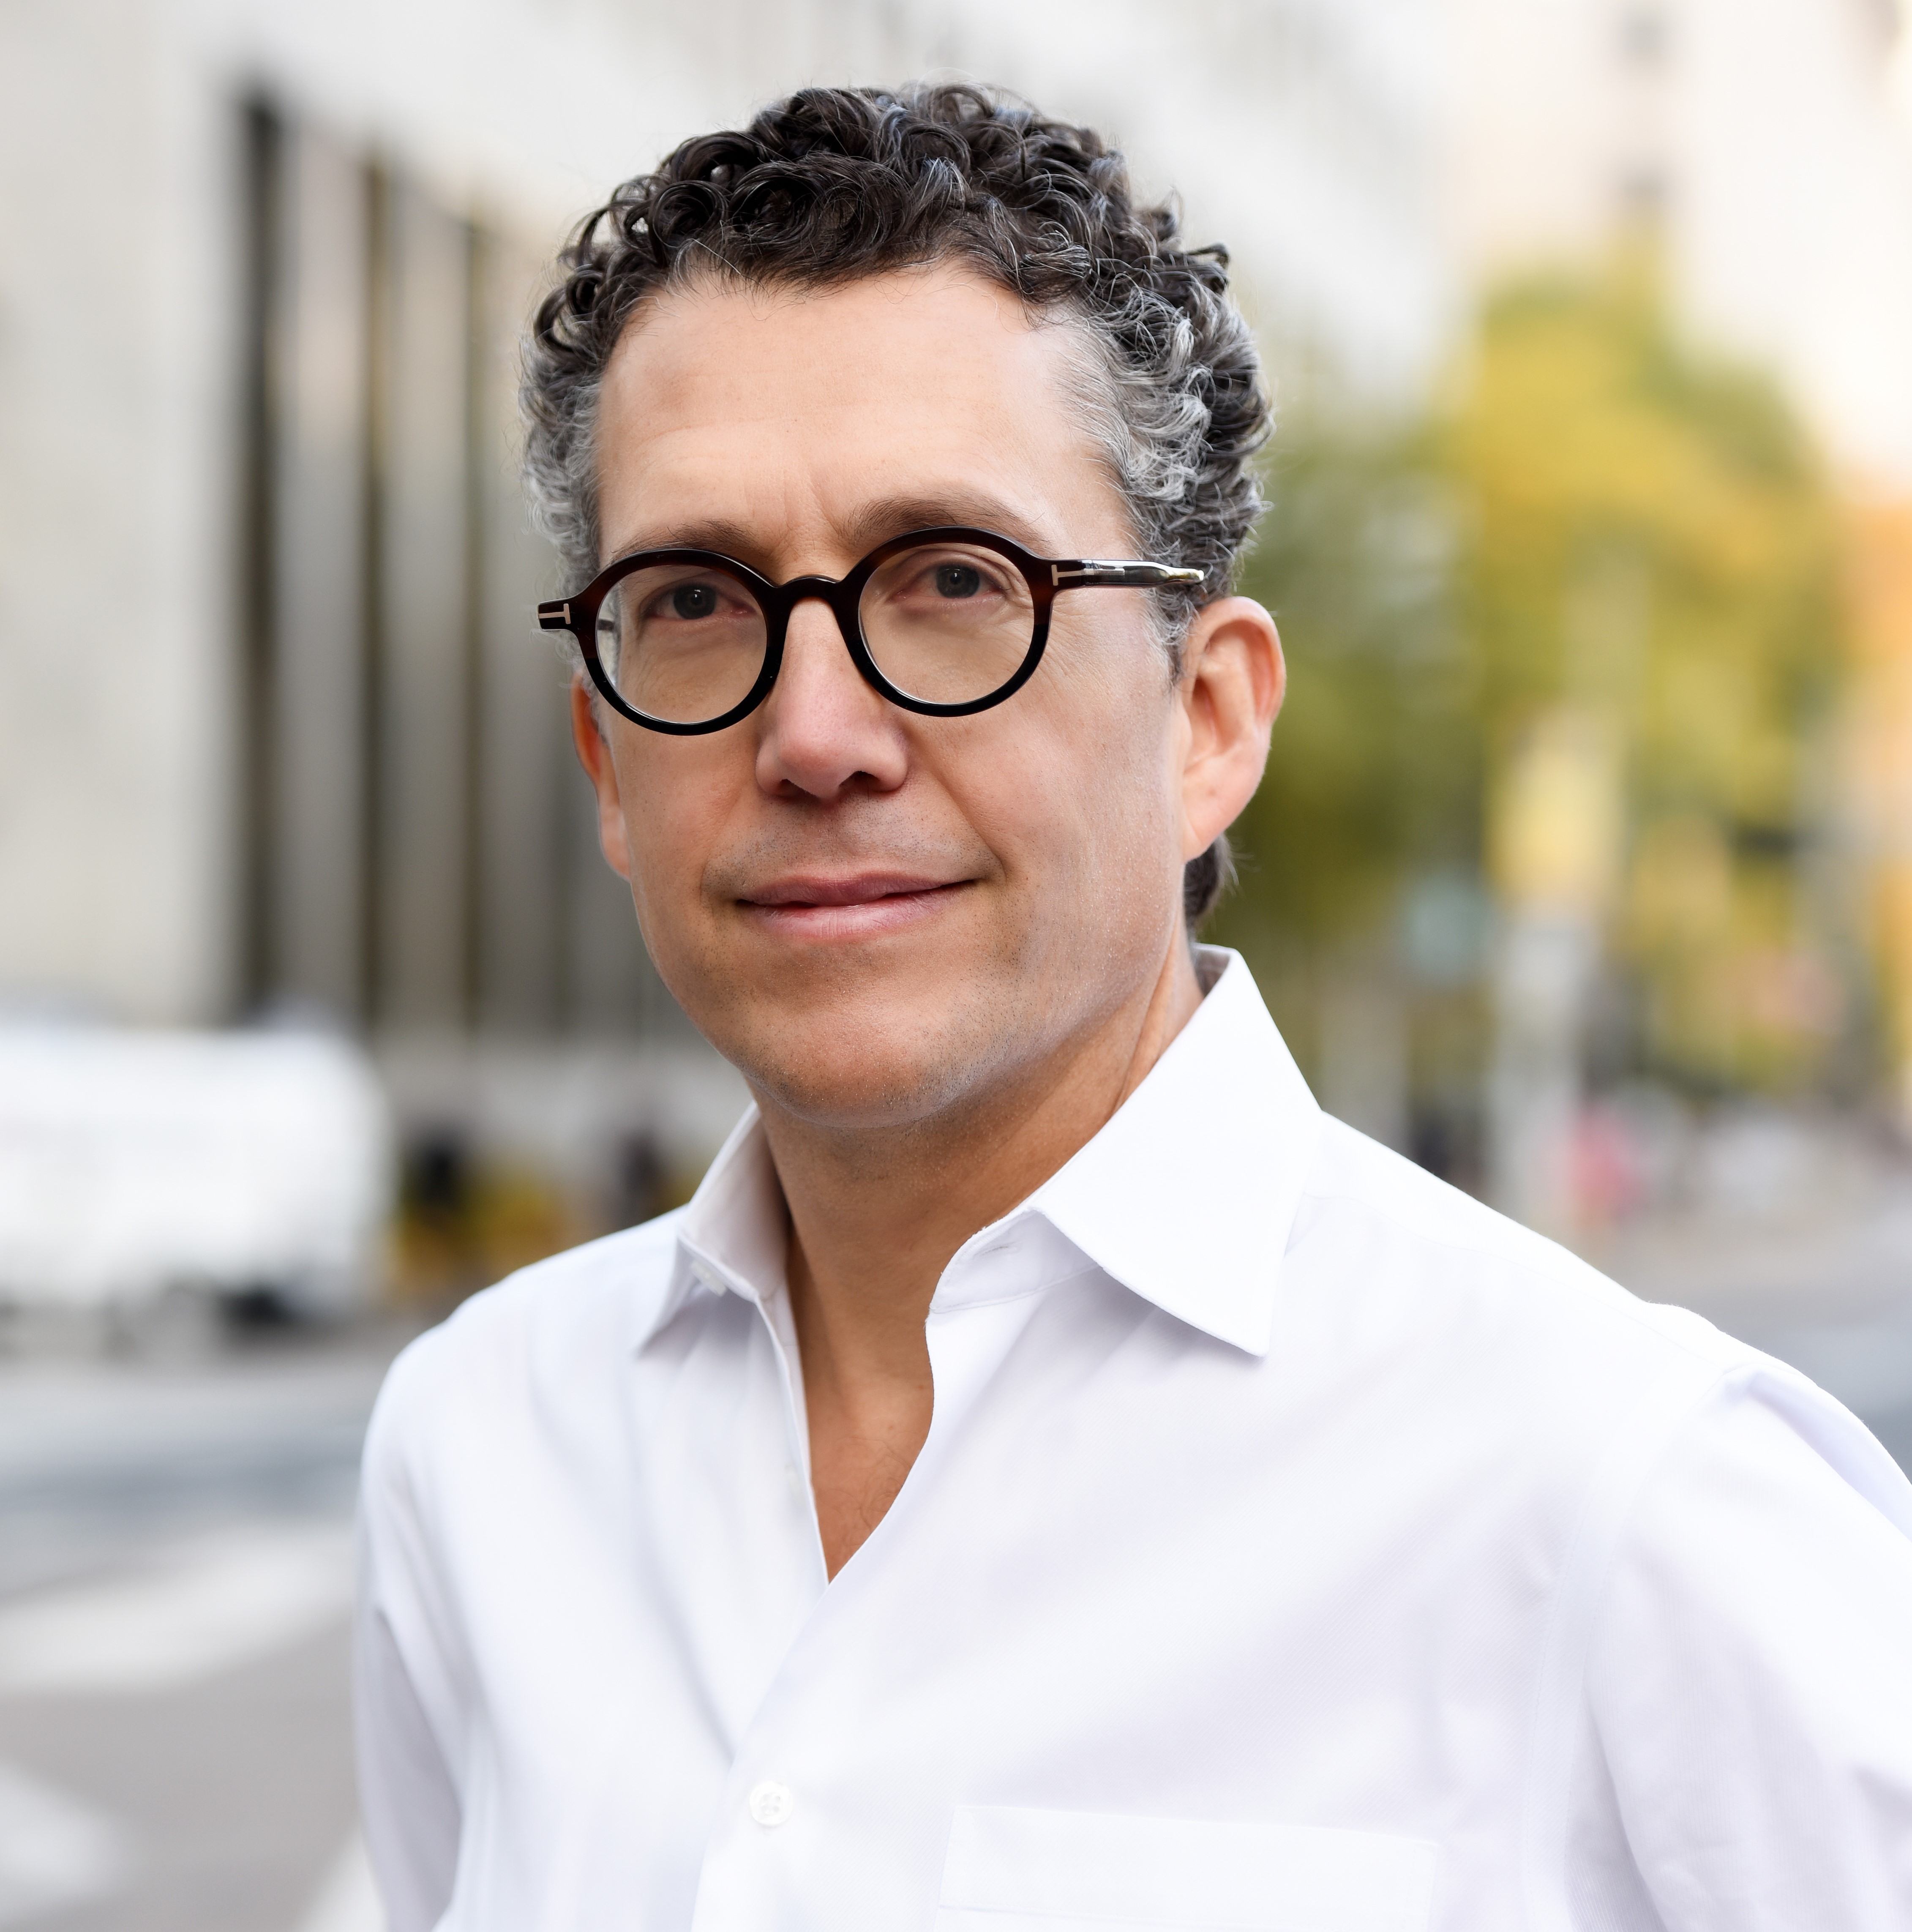 Headshot of Antonio Gomez-Palacio, architect and urban planner. Antonio wears a white shirt and black glasses. He is standing outside, with a streetscape in the background.